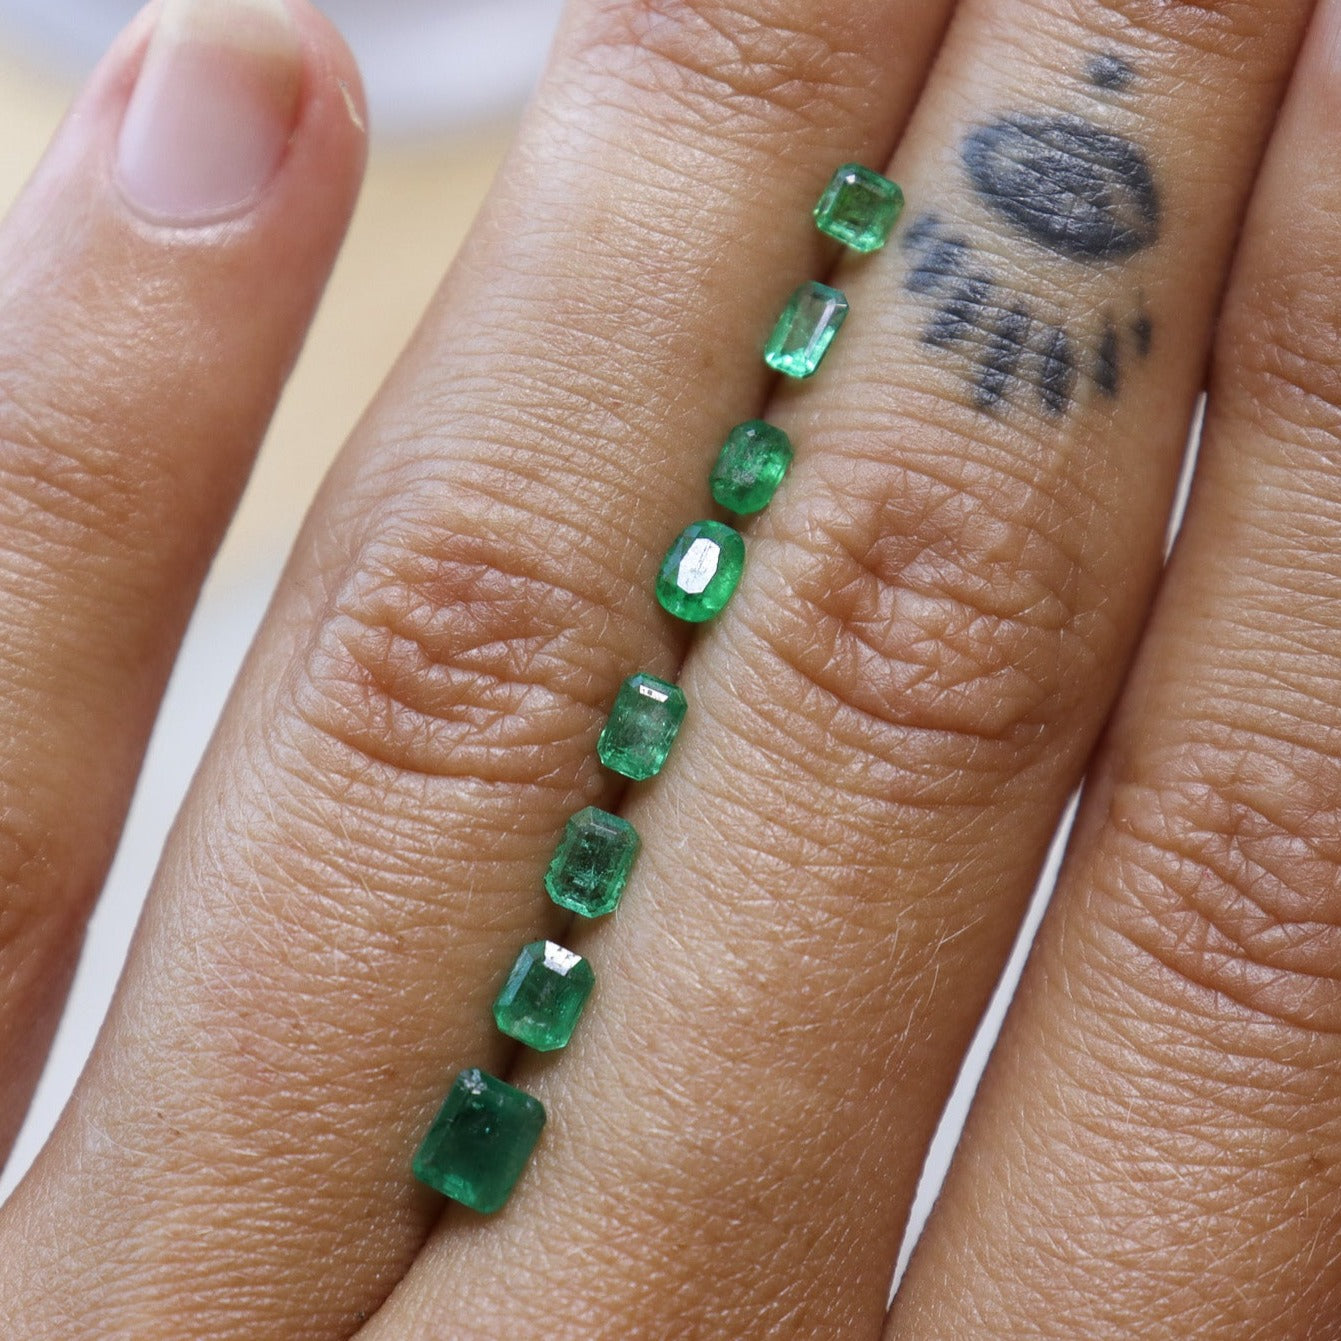 An array of emeralds shown on a hand for size and color comparison to choose from when creating your own ring.